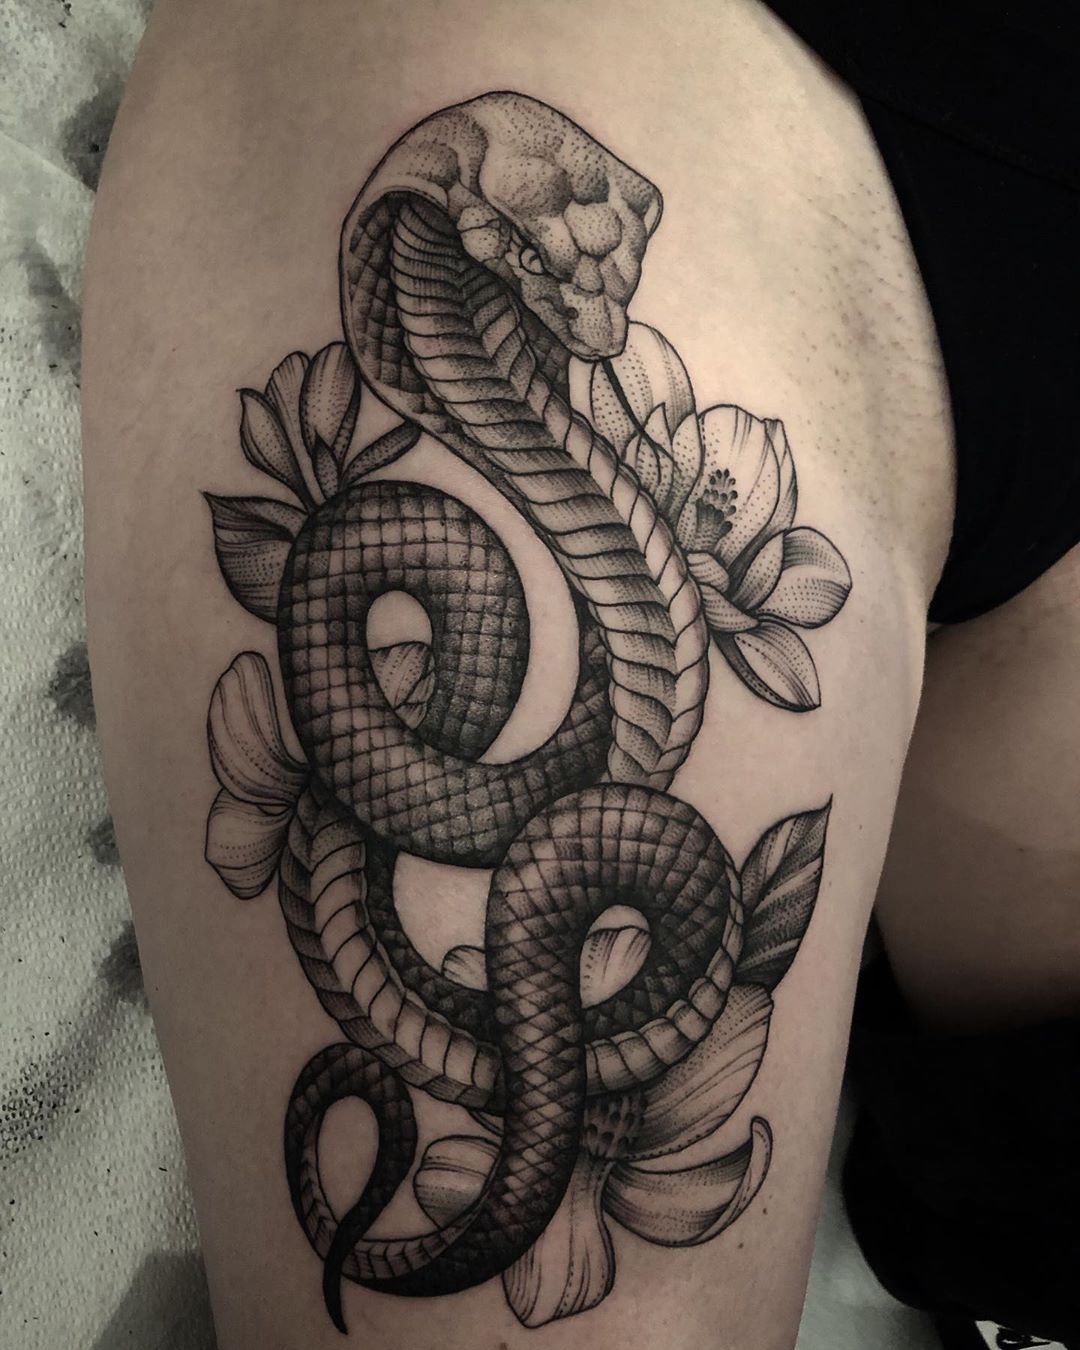 23 Incredible Snake Tattoos to Inspire Yours  The Pagan Grimoire